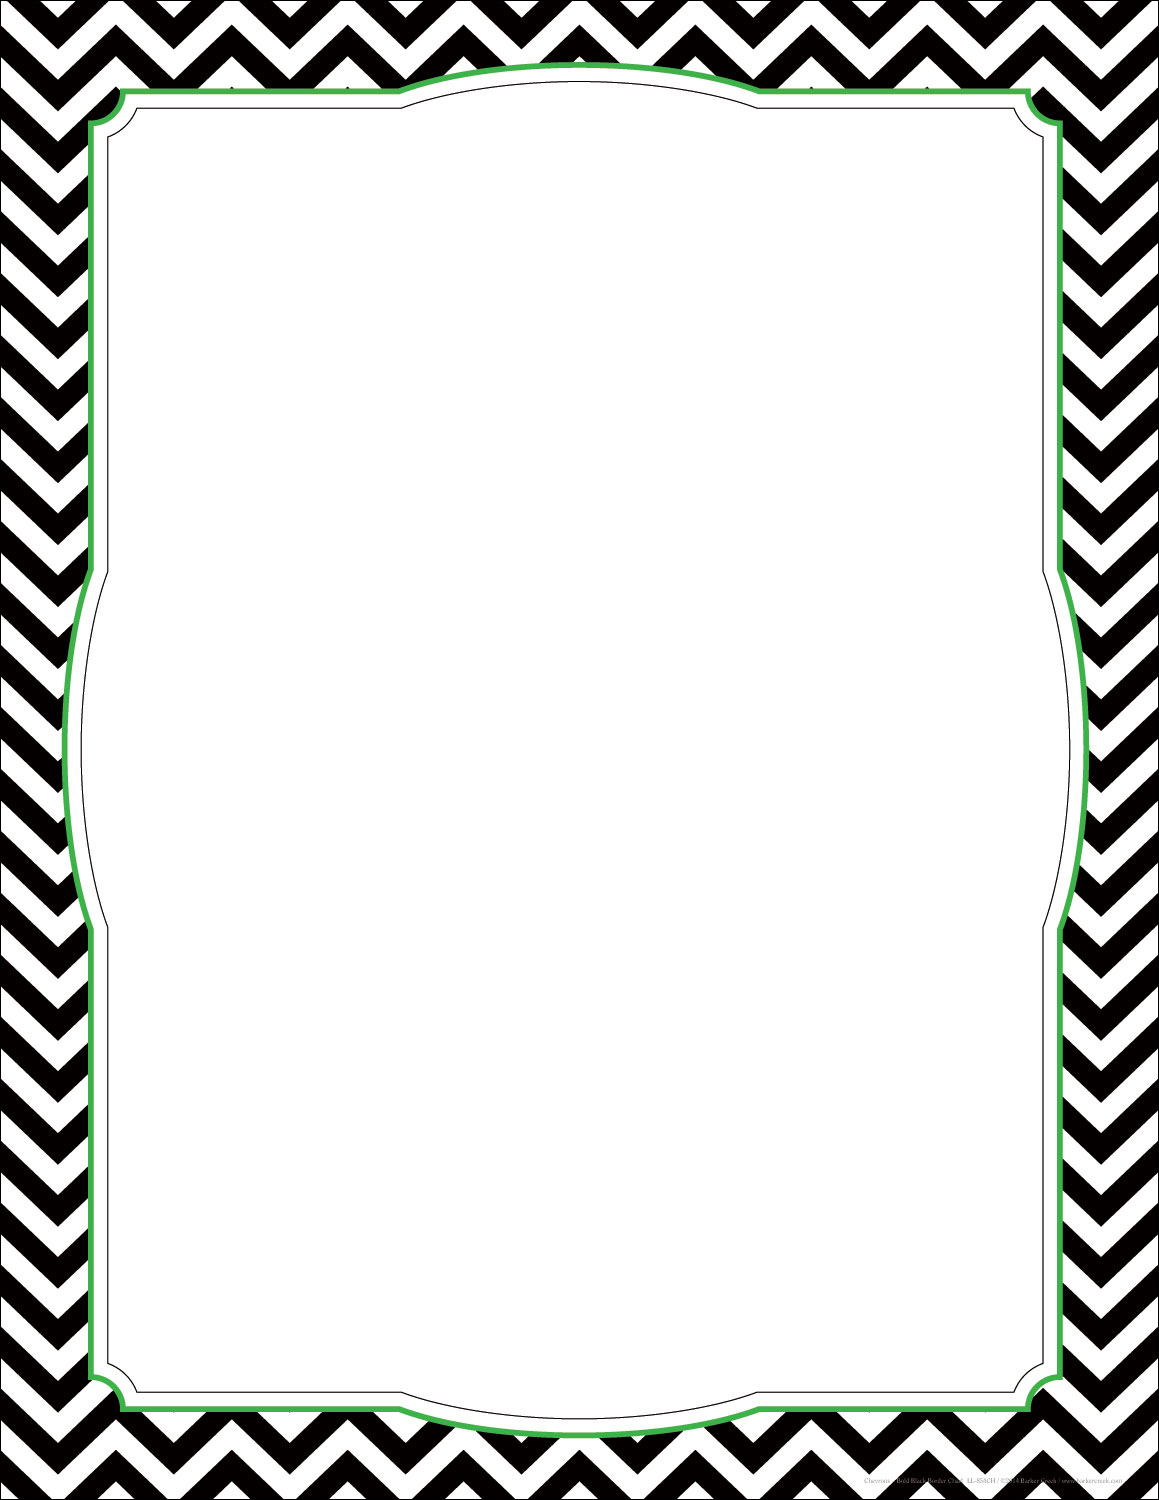 Free  borders clip art borders and frames free clipart images